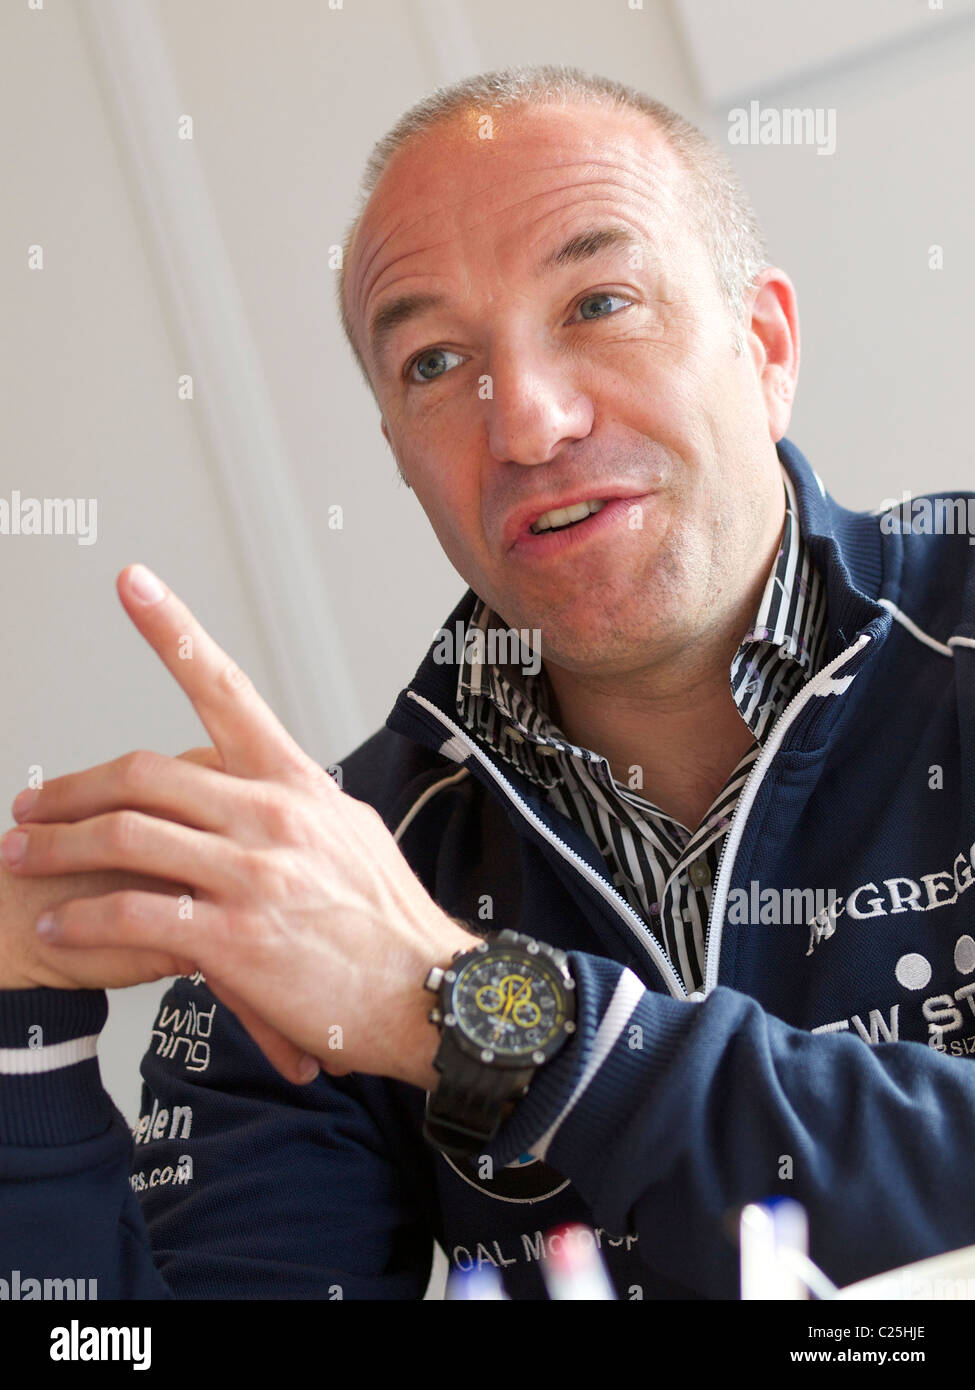 Dutch racing car driver and TV personality Tom Coronel Stock Photo